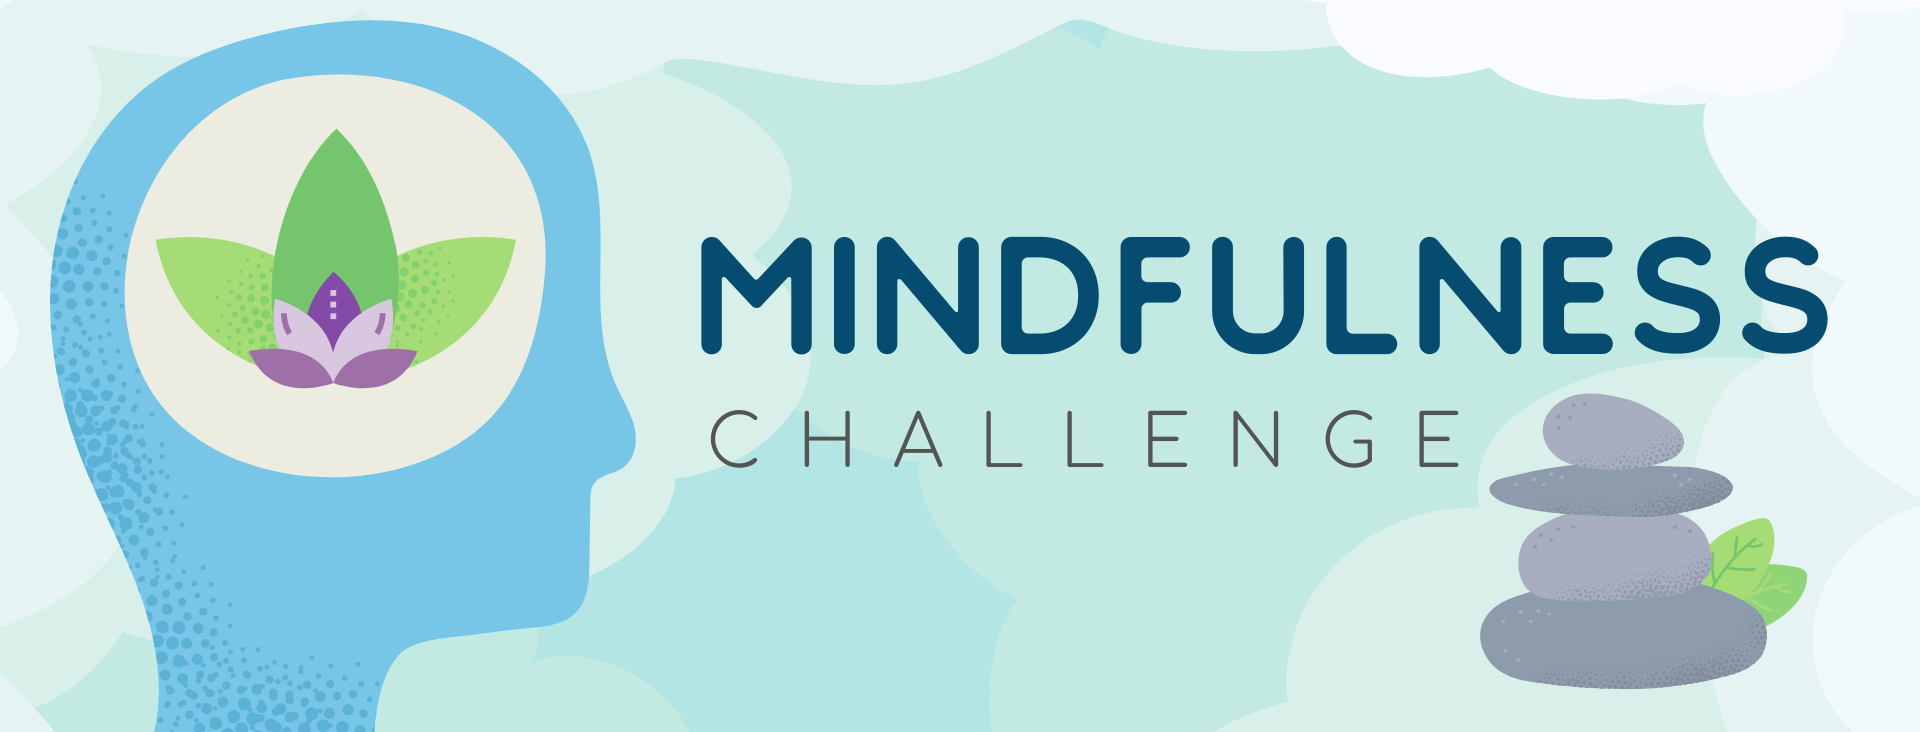 Mindfulness Challenge. Calming image with blue watercolor, a smooth pile of rocks, and a simple illustration of a person's head with a blooming flower inside